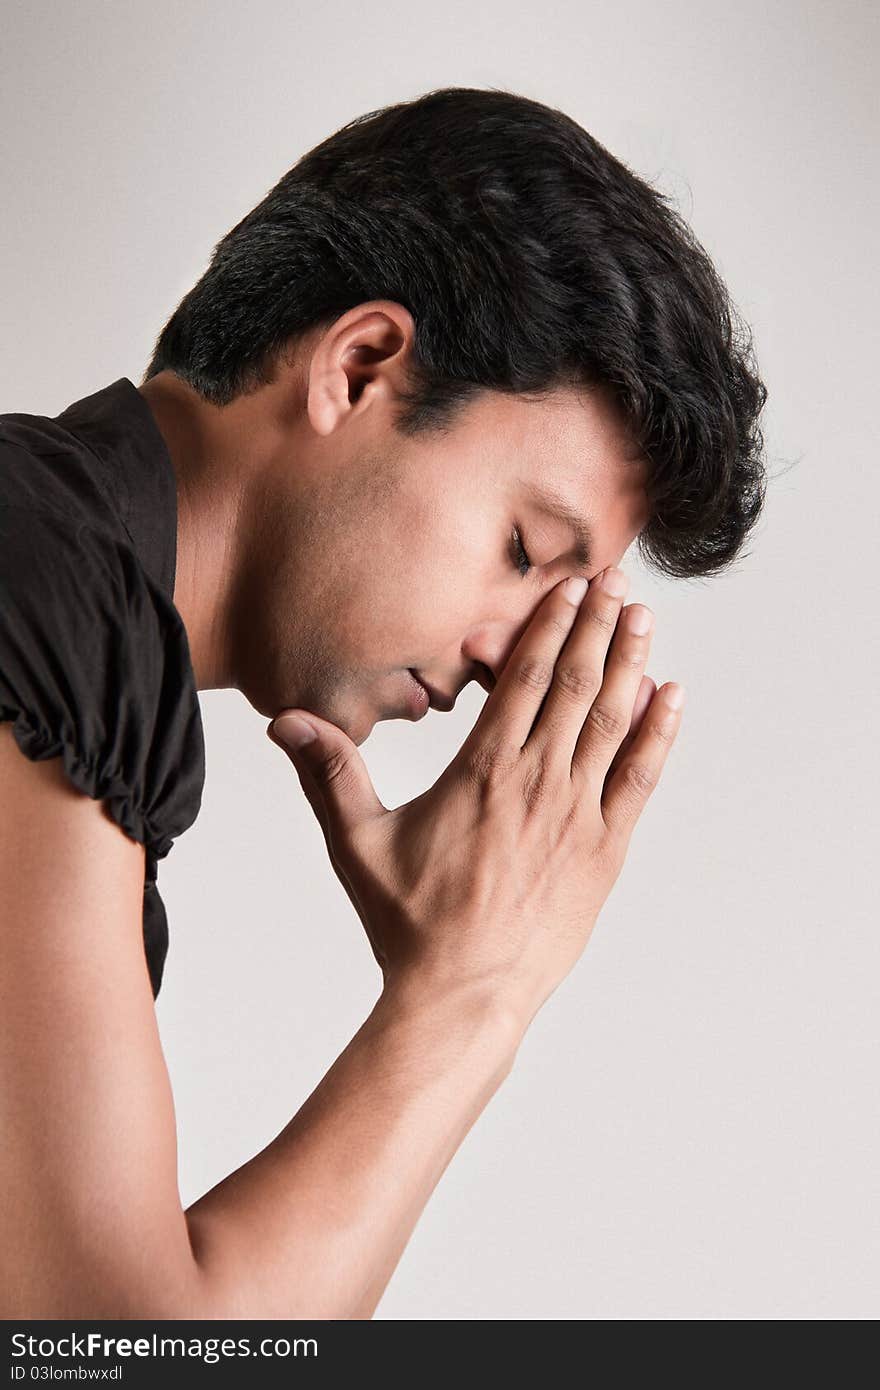 Indian man in the position of thinking his head supported by hand and closed eyes. Indian man in the position of thinking his head supported by hand and closed eyes